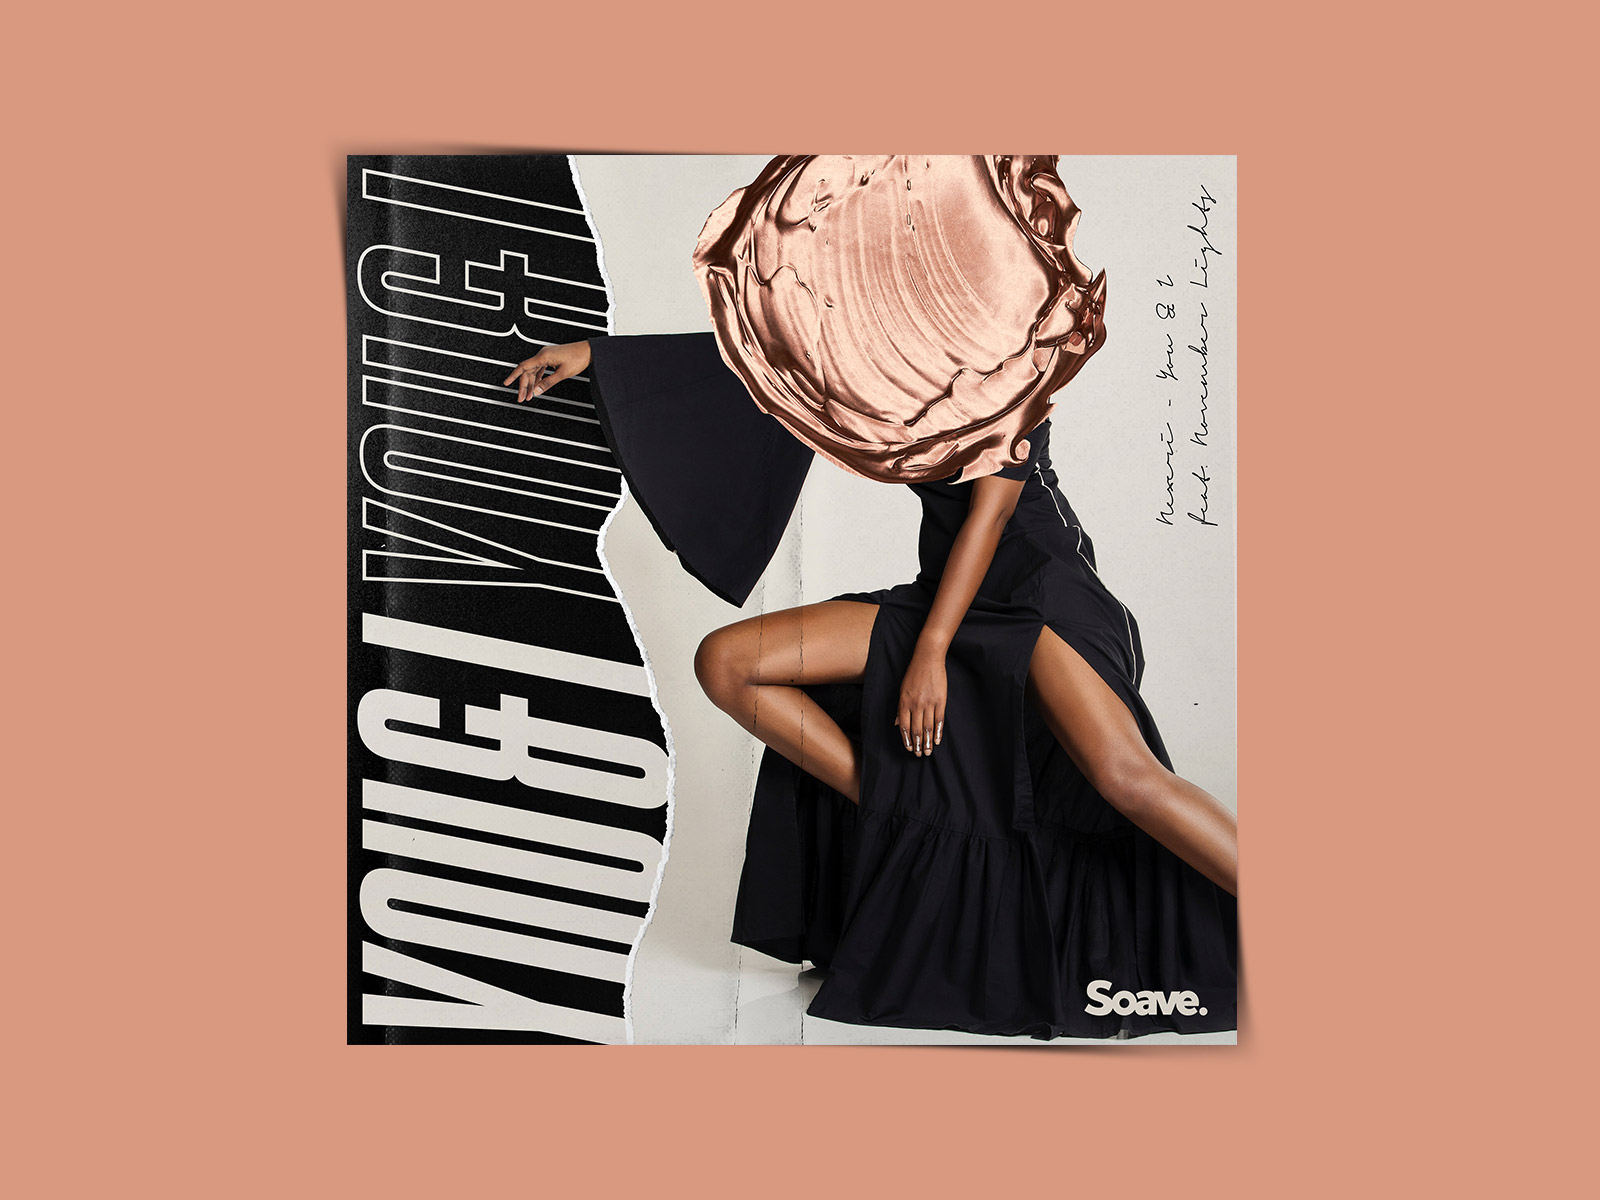 You & I - Cover Art by Studio South on Dribbble